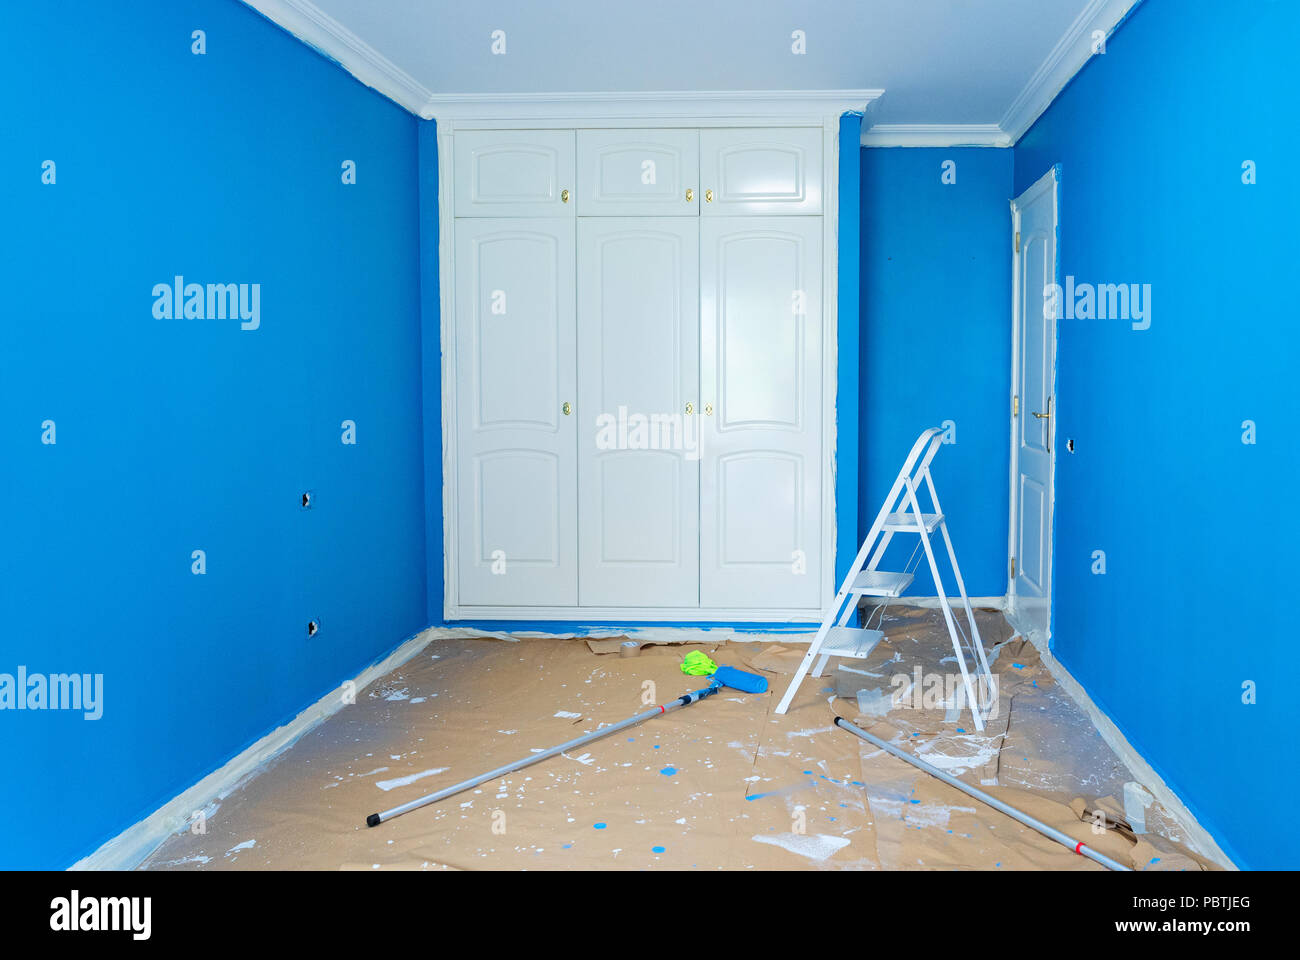 home renovation concept - old flat during restoration or refurbishment with newly painted blue walls Stock Photo